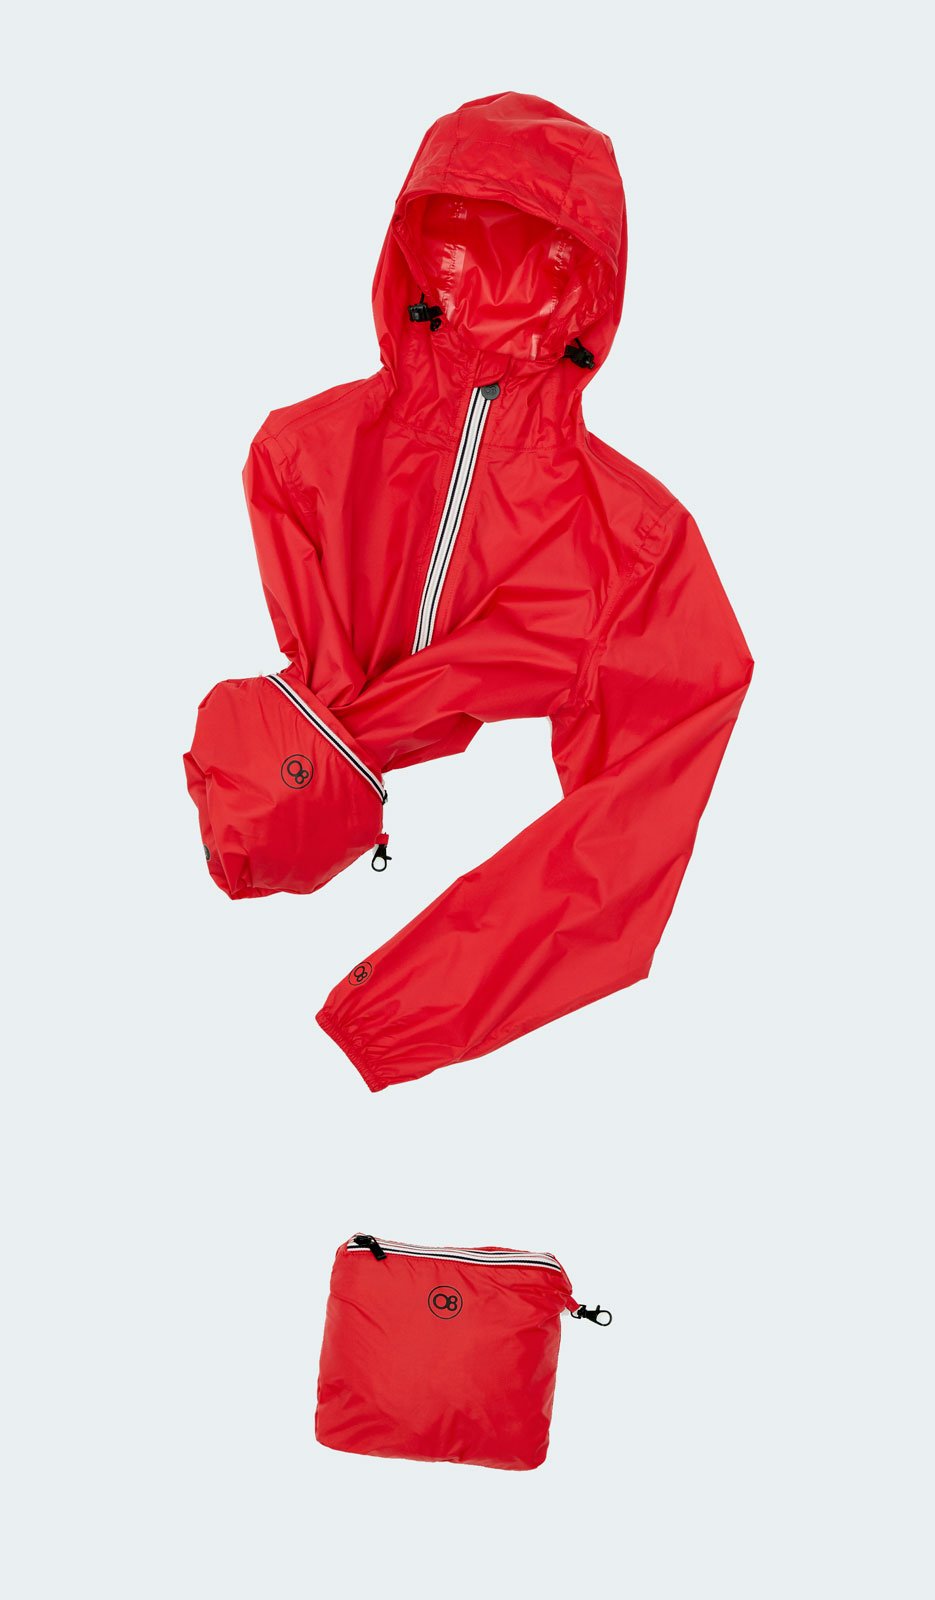 Picture of a Men's Quarter Zip White Waterproof Rain Jacket how to pack the item in red